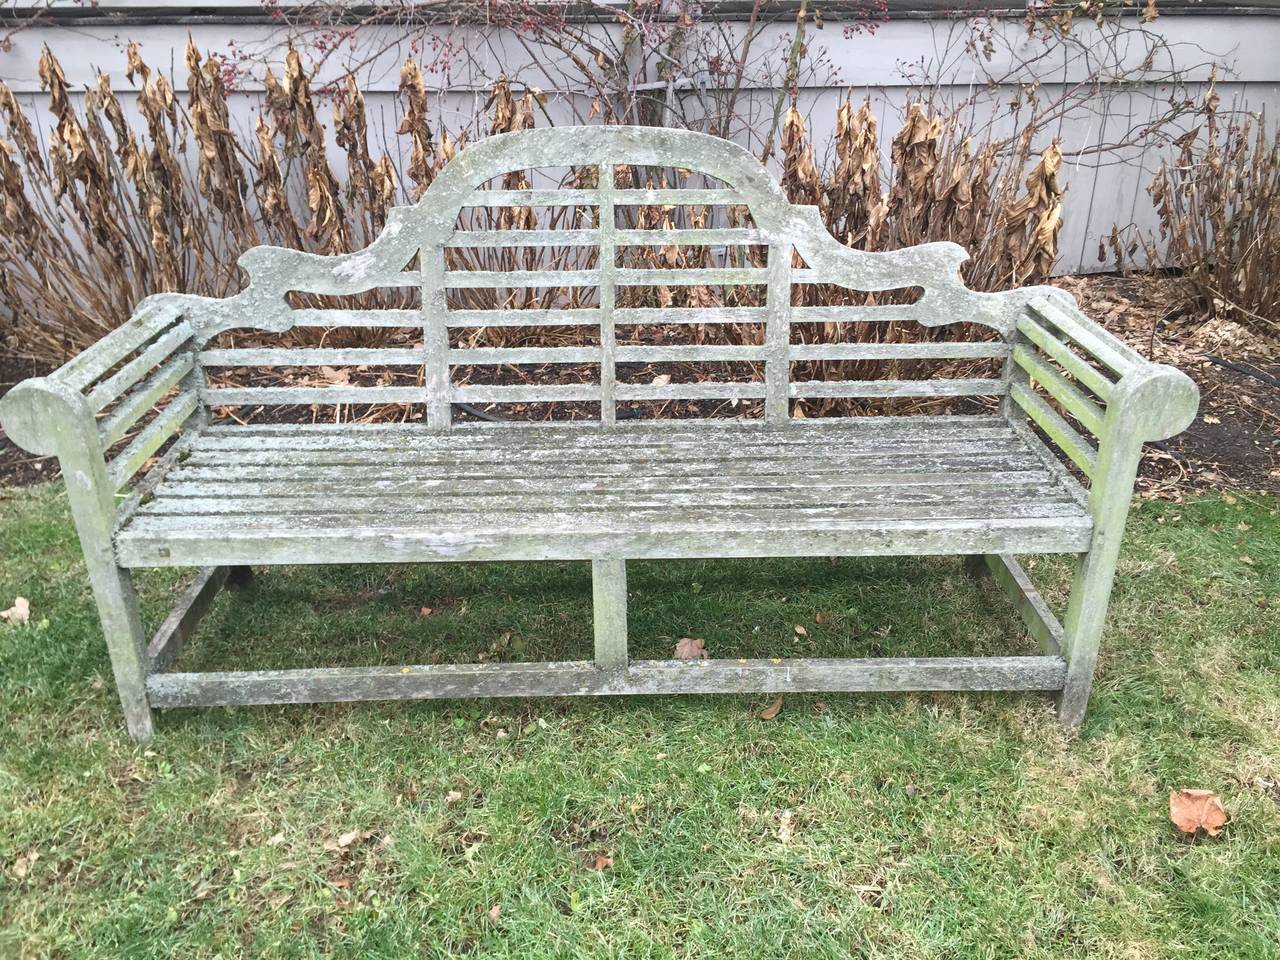 We love this length on Lutyens benches, as they easily seat three-four each on either side of an outside table and can also be moved around as seating in the garden.
One has more lichen than the other, as it sat underneath a large chestnut tree. In